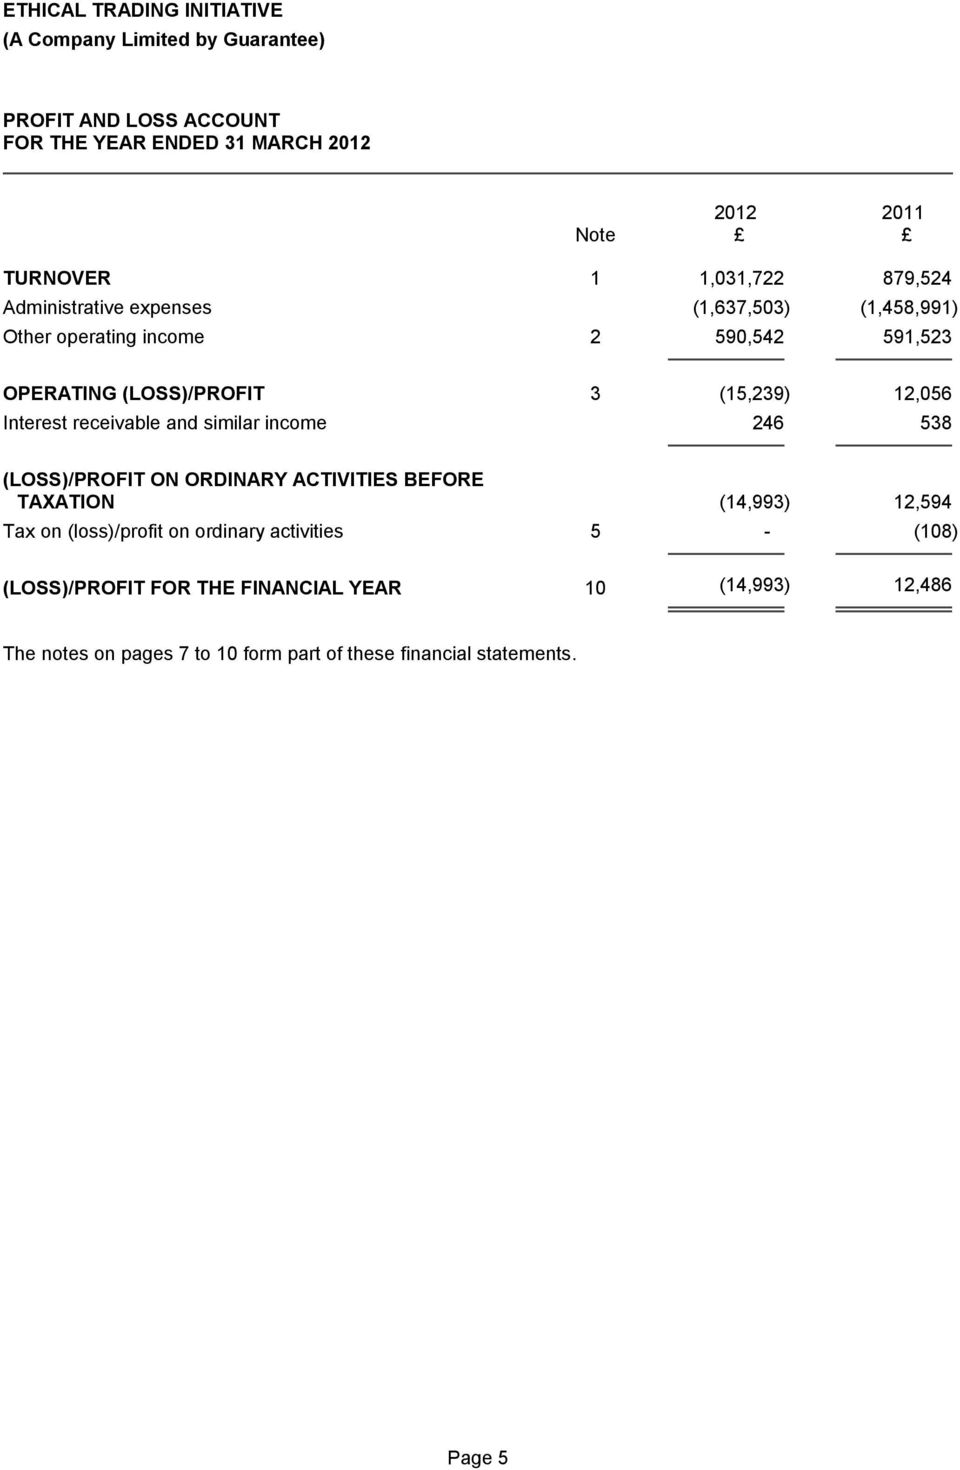 (LOSS)/PROFIT ON ORDINARY ACTIVITIES BEFORE TAXATION (14,993) 12,594 Tax on (loss)/profit on ordinary activities 5 - (108)